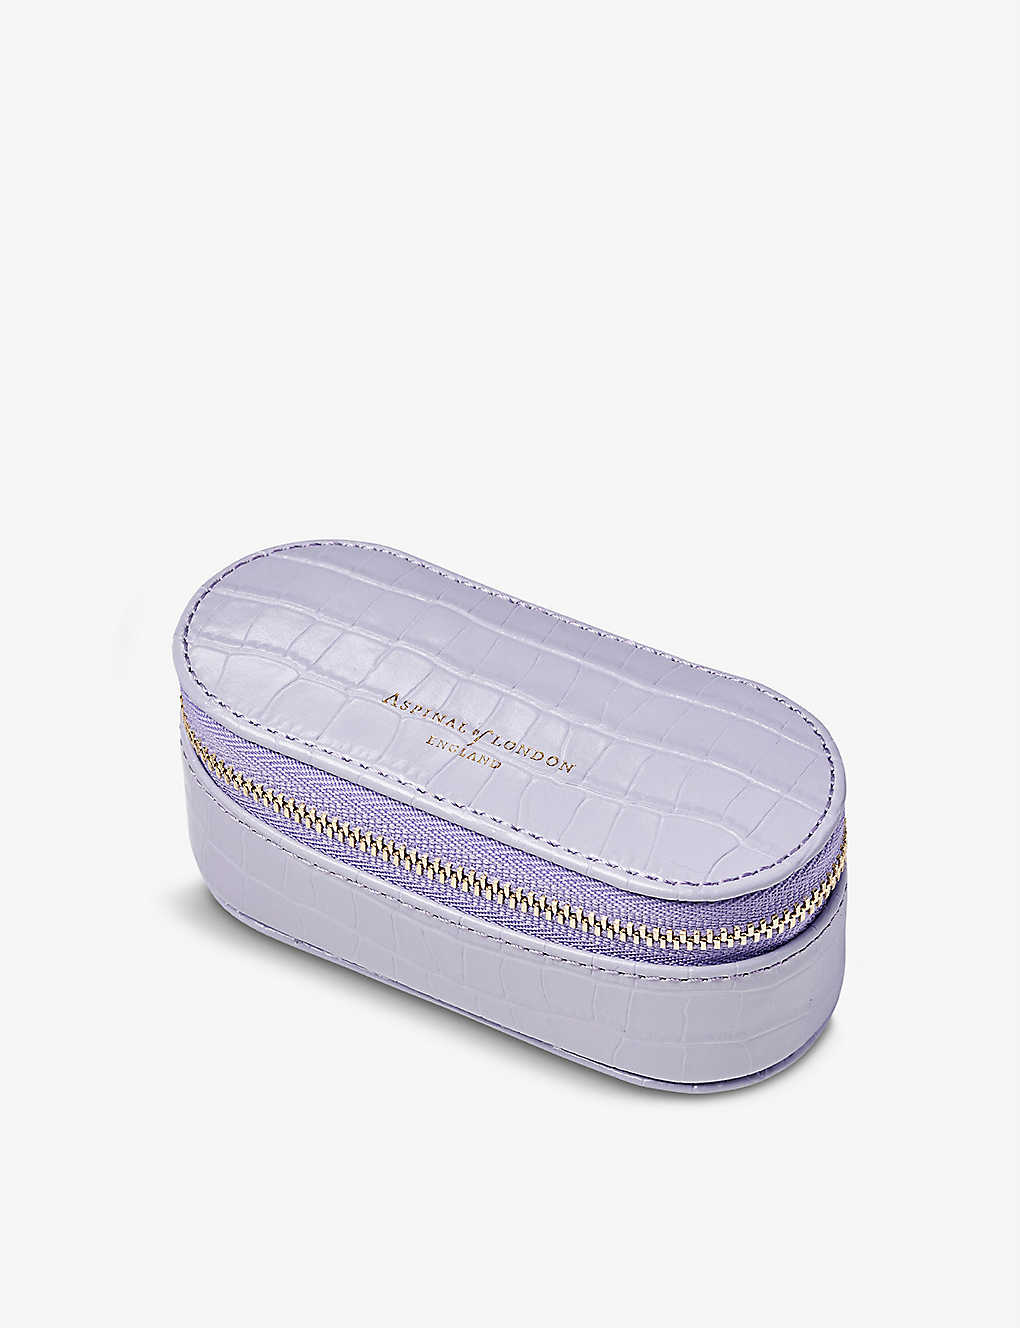 Aspinal Of London Lavender Handbag Tidy All Logo-embossed Leather Pouch